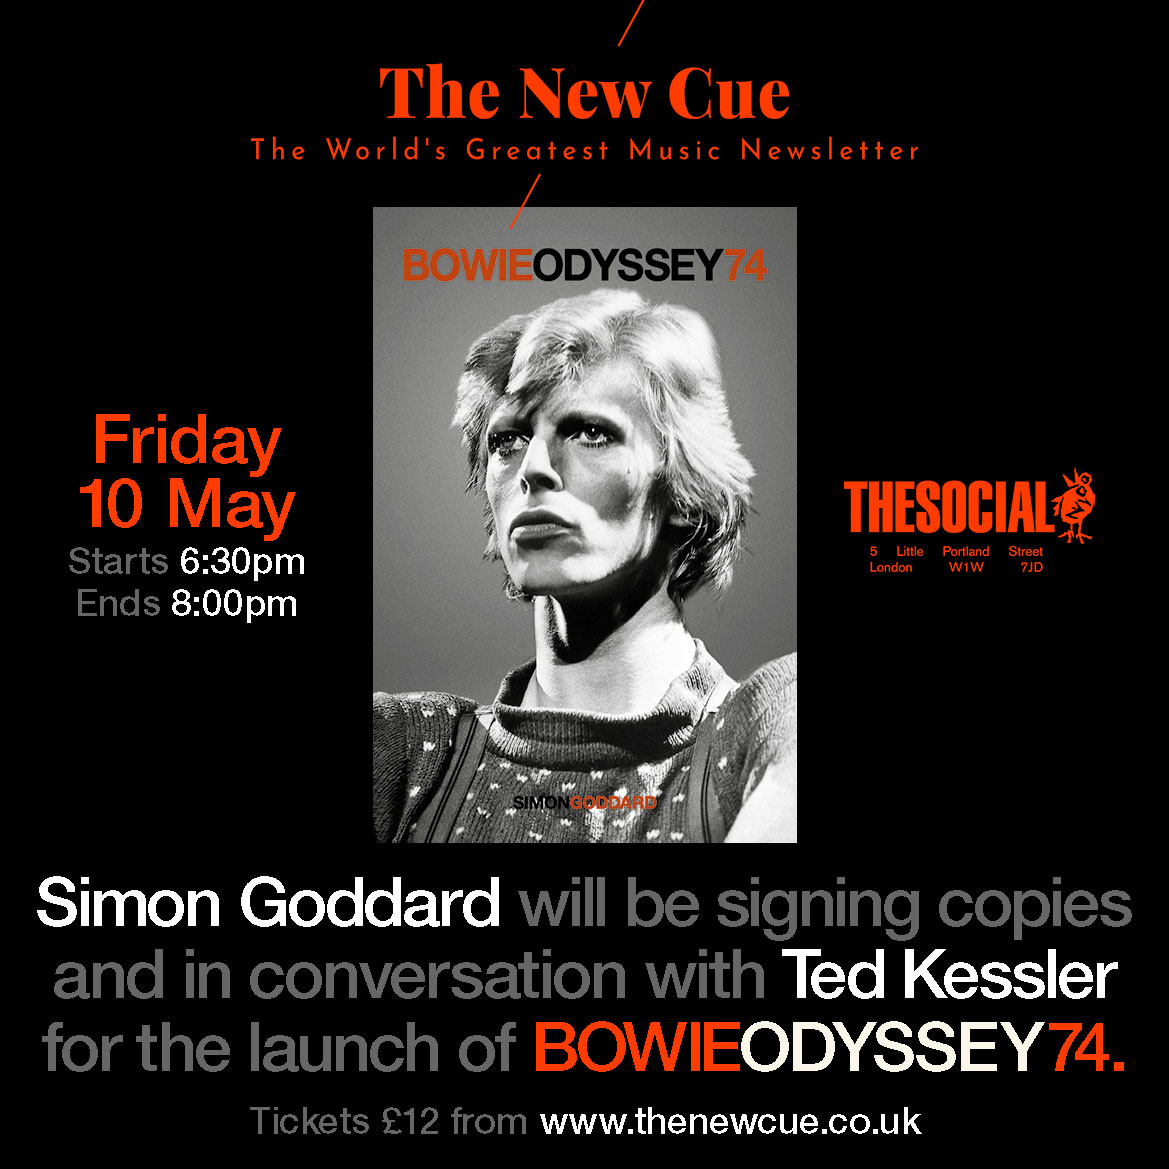 BOWIE ⚡ EVENT NEWS! ⚡ Simon Goddard will be in conversation with @TedKessler1 at @thesocial for the launch of BOWIE ODYSSEY 74 with @TheNewCue1